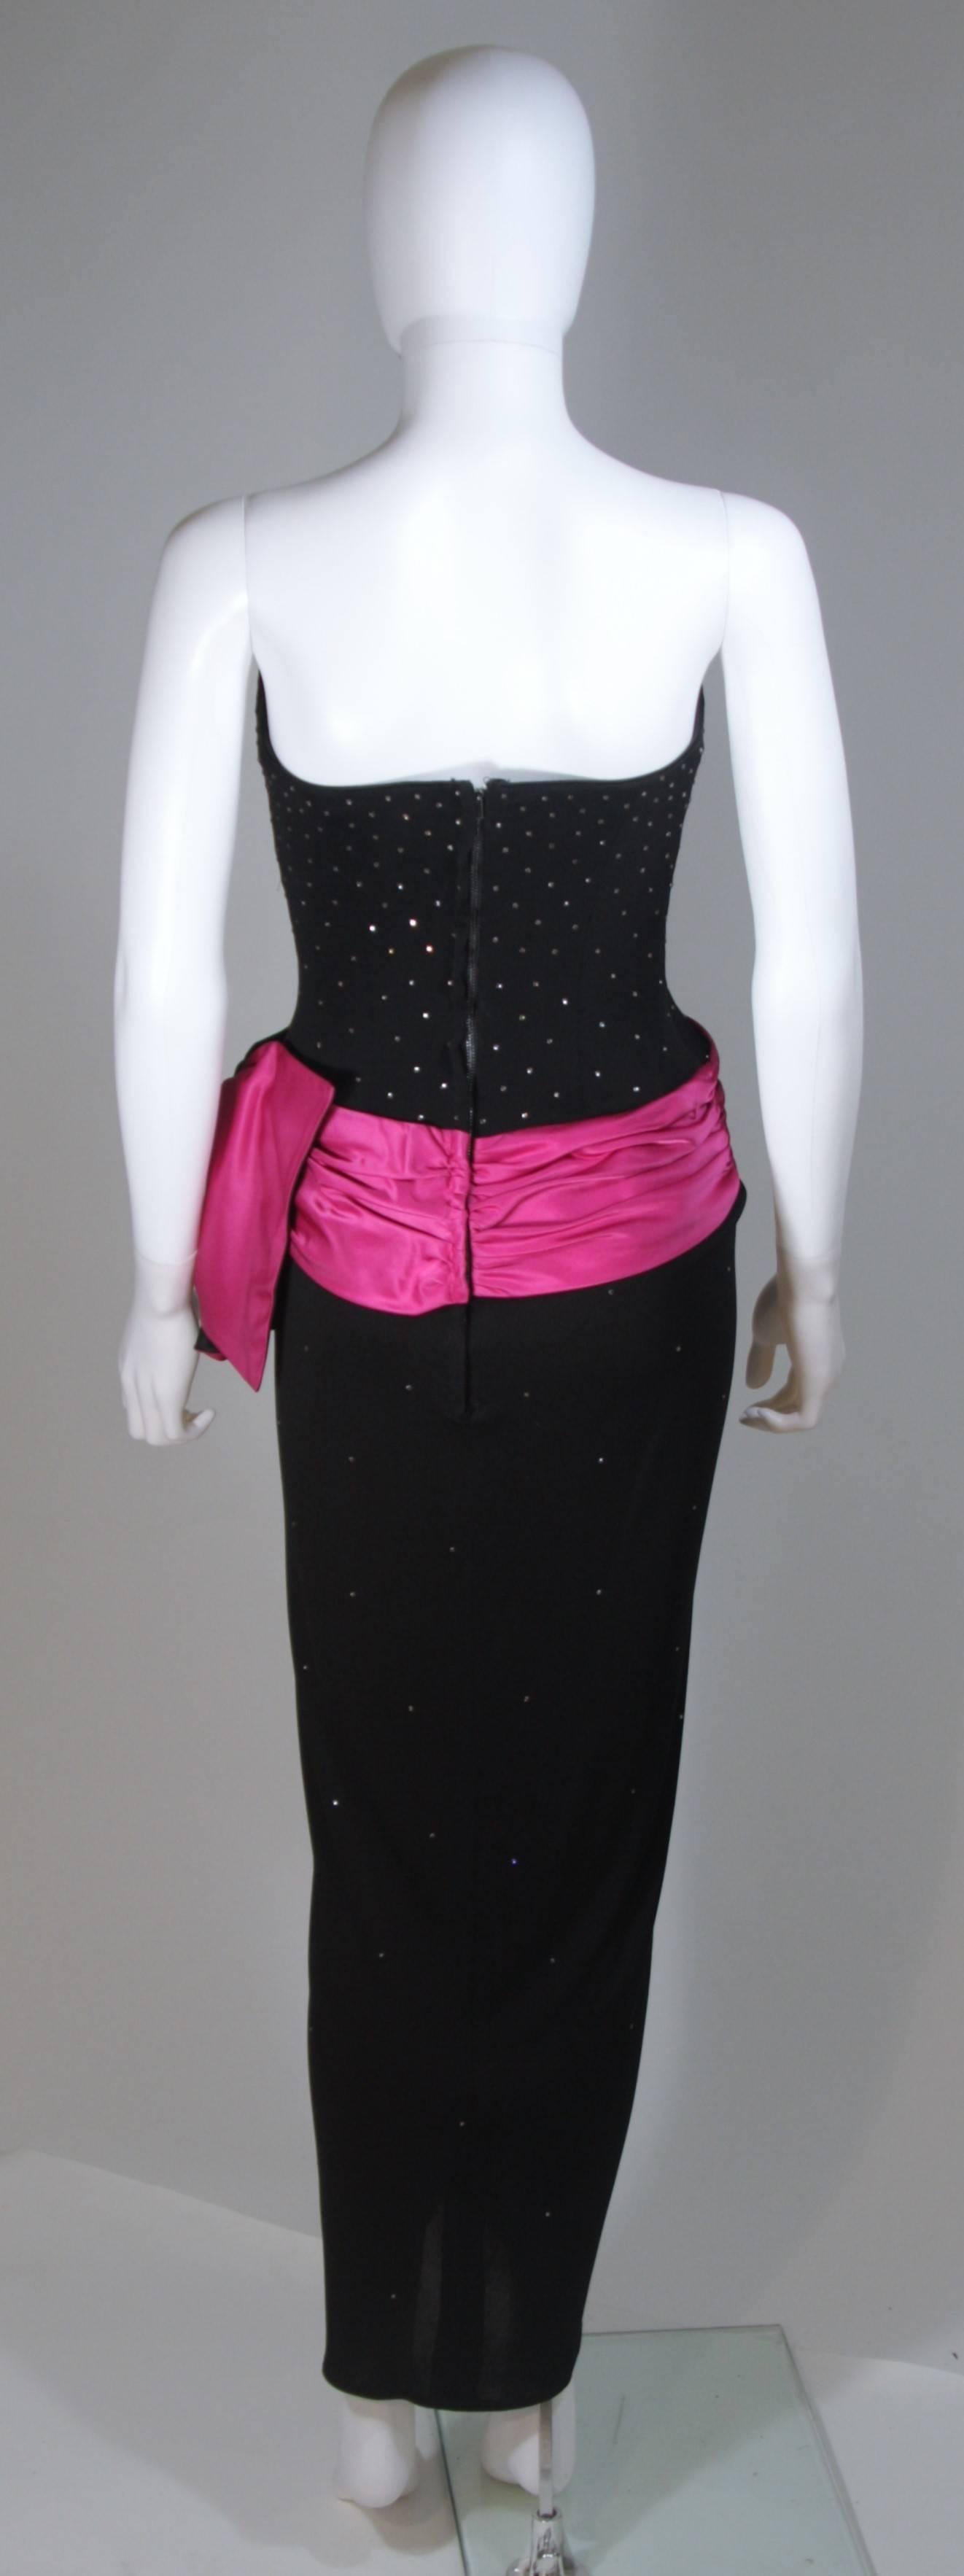 TRACEY MILLS 1980's Black Gown with Magenta Contrast and Large Bow Size 4-6 For Sale 4